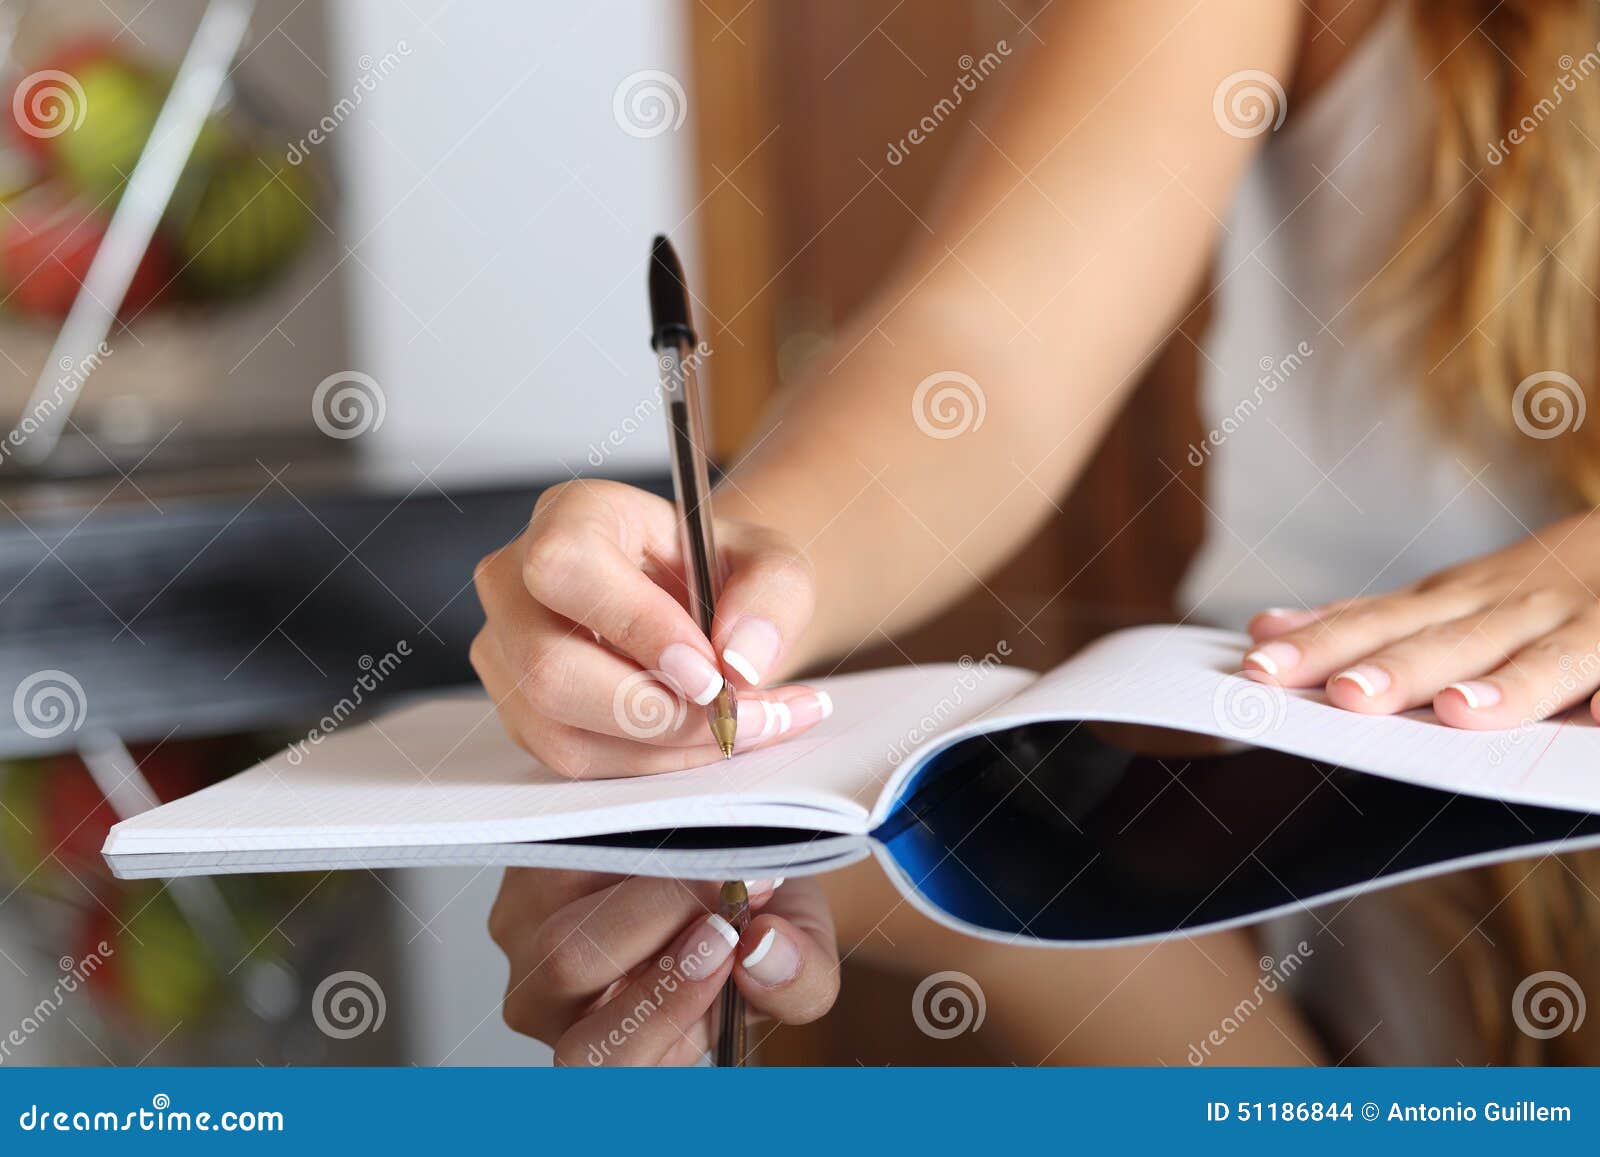 woman writer hand writing in a notebook at home